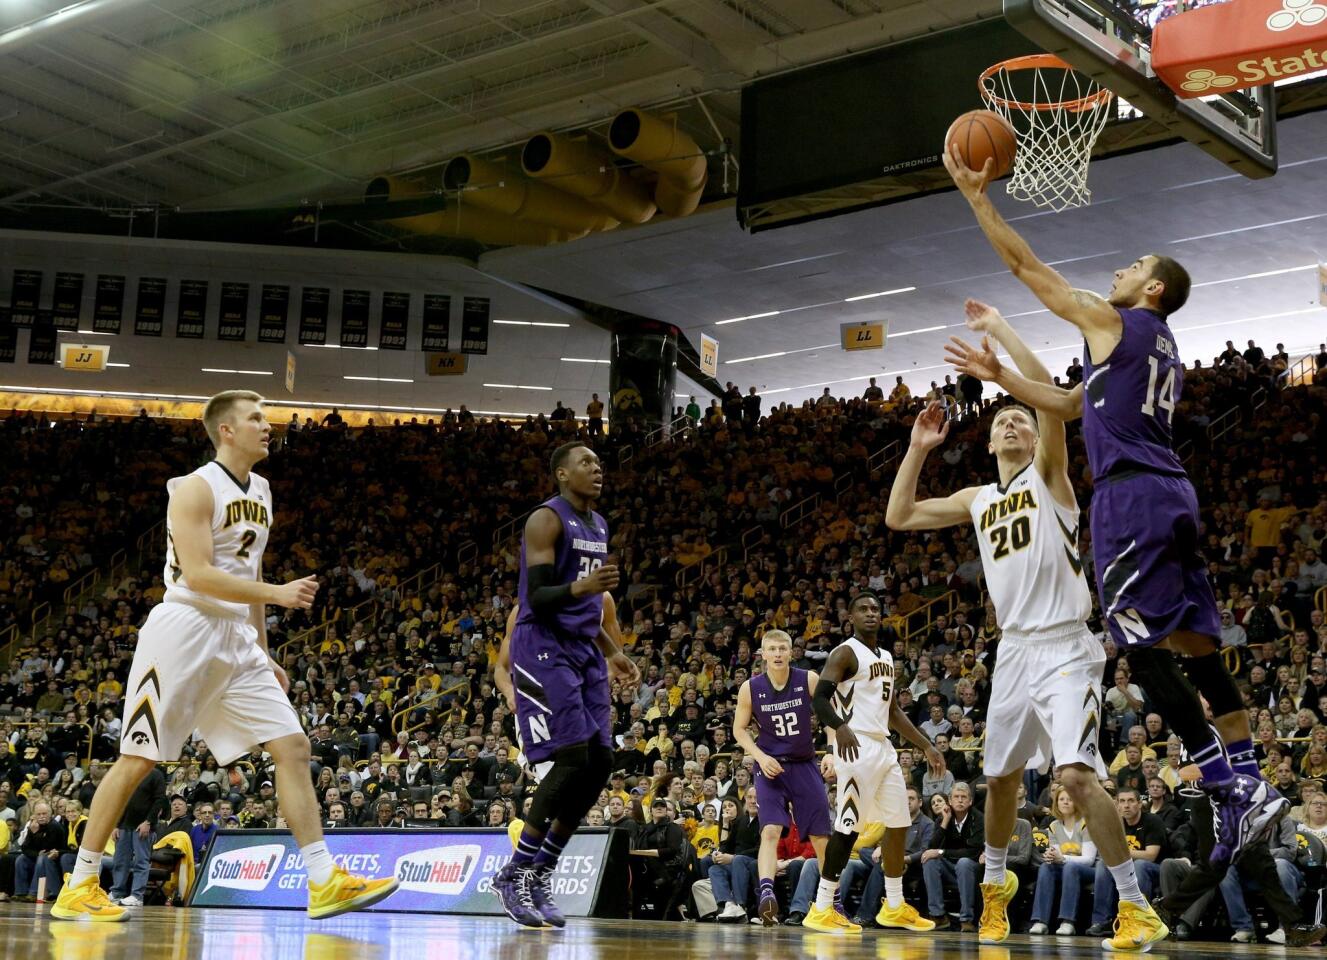 Northwestern guard Tre Demps puts in a reverse lay up past Iowa forward Jarrod Uthoff during the second half.